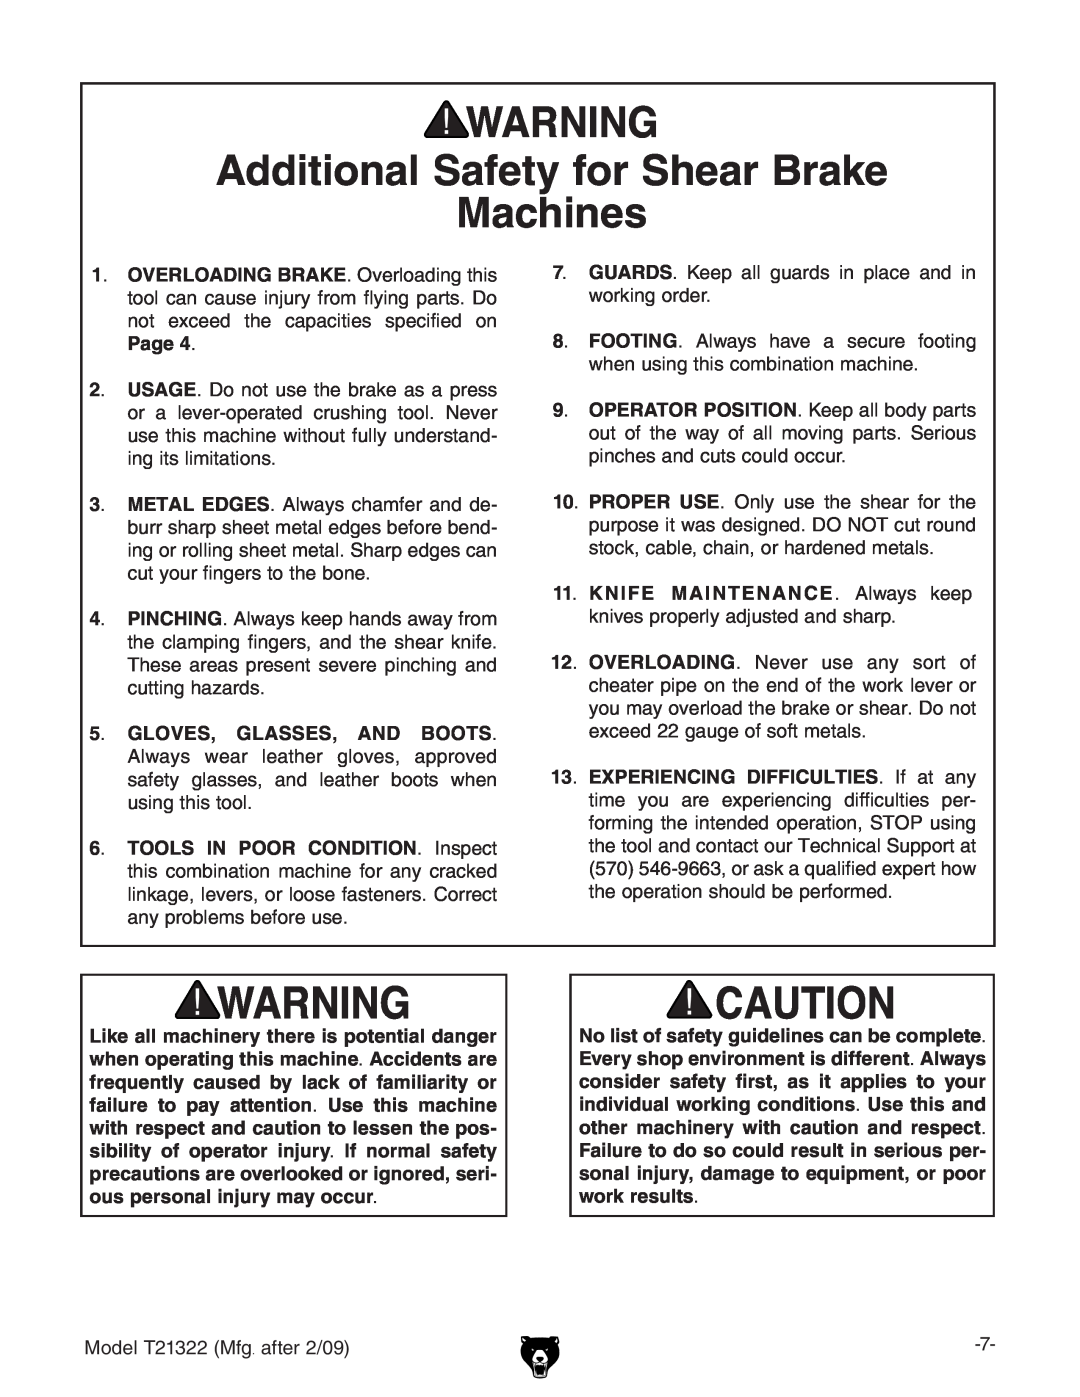 Grizzly T21322 owner manual Additional Safety for Shear Brake Machines, Page 4# 